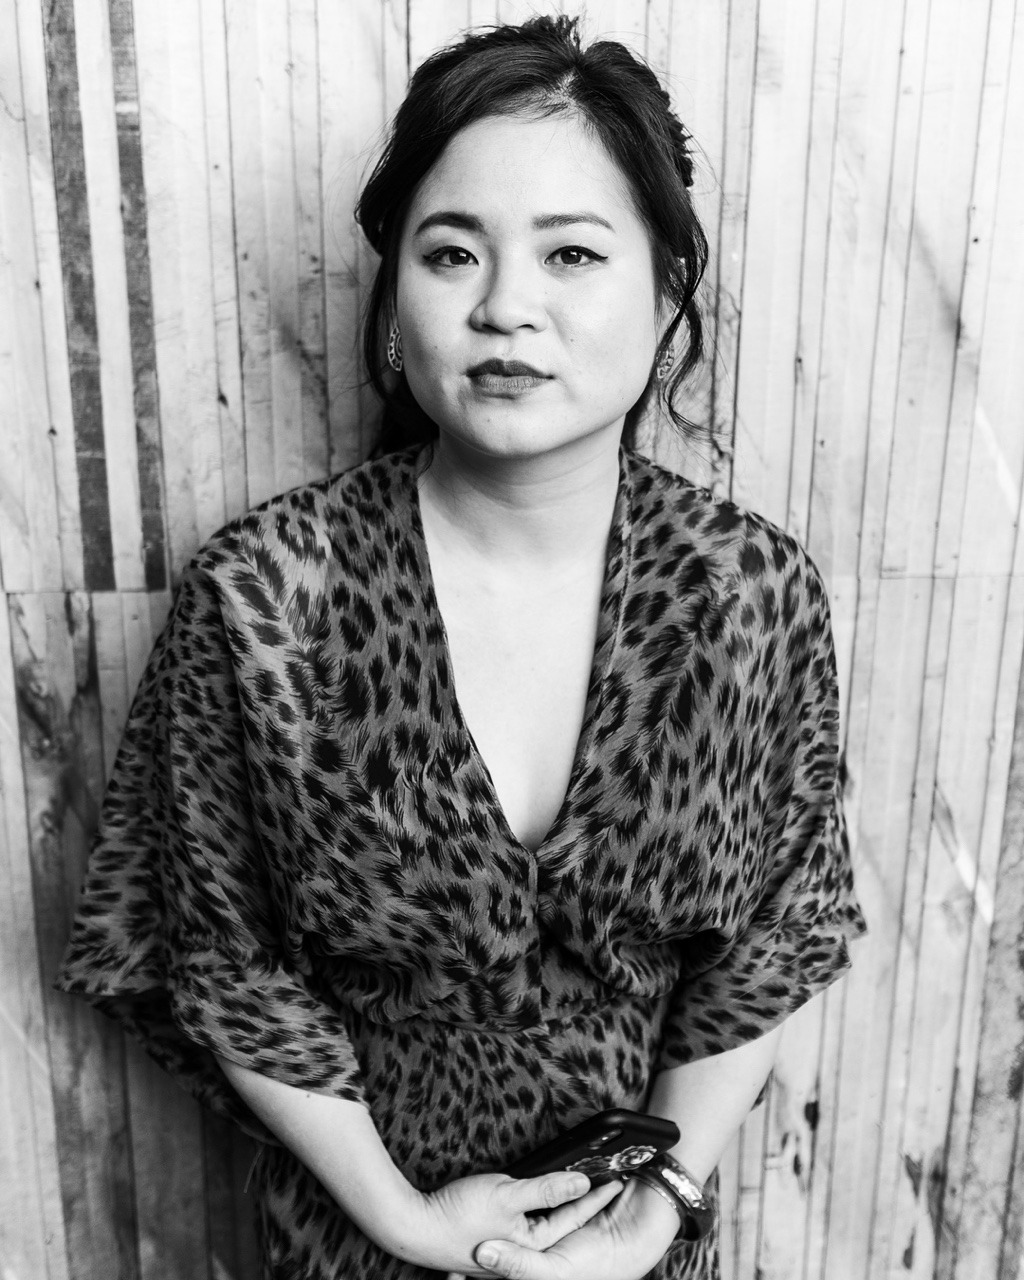 sleemo: Kelly Marie Tran photographed by Eduardo Fierro on set of Sorry For Your